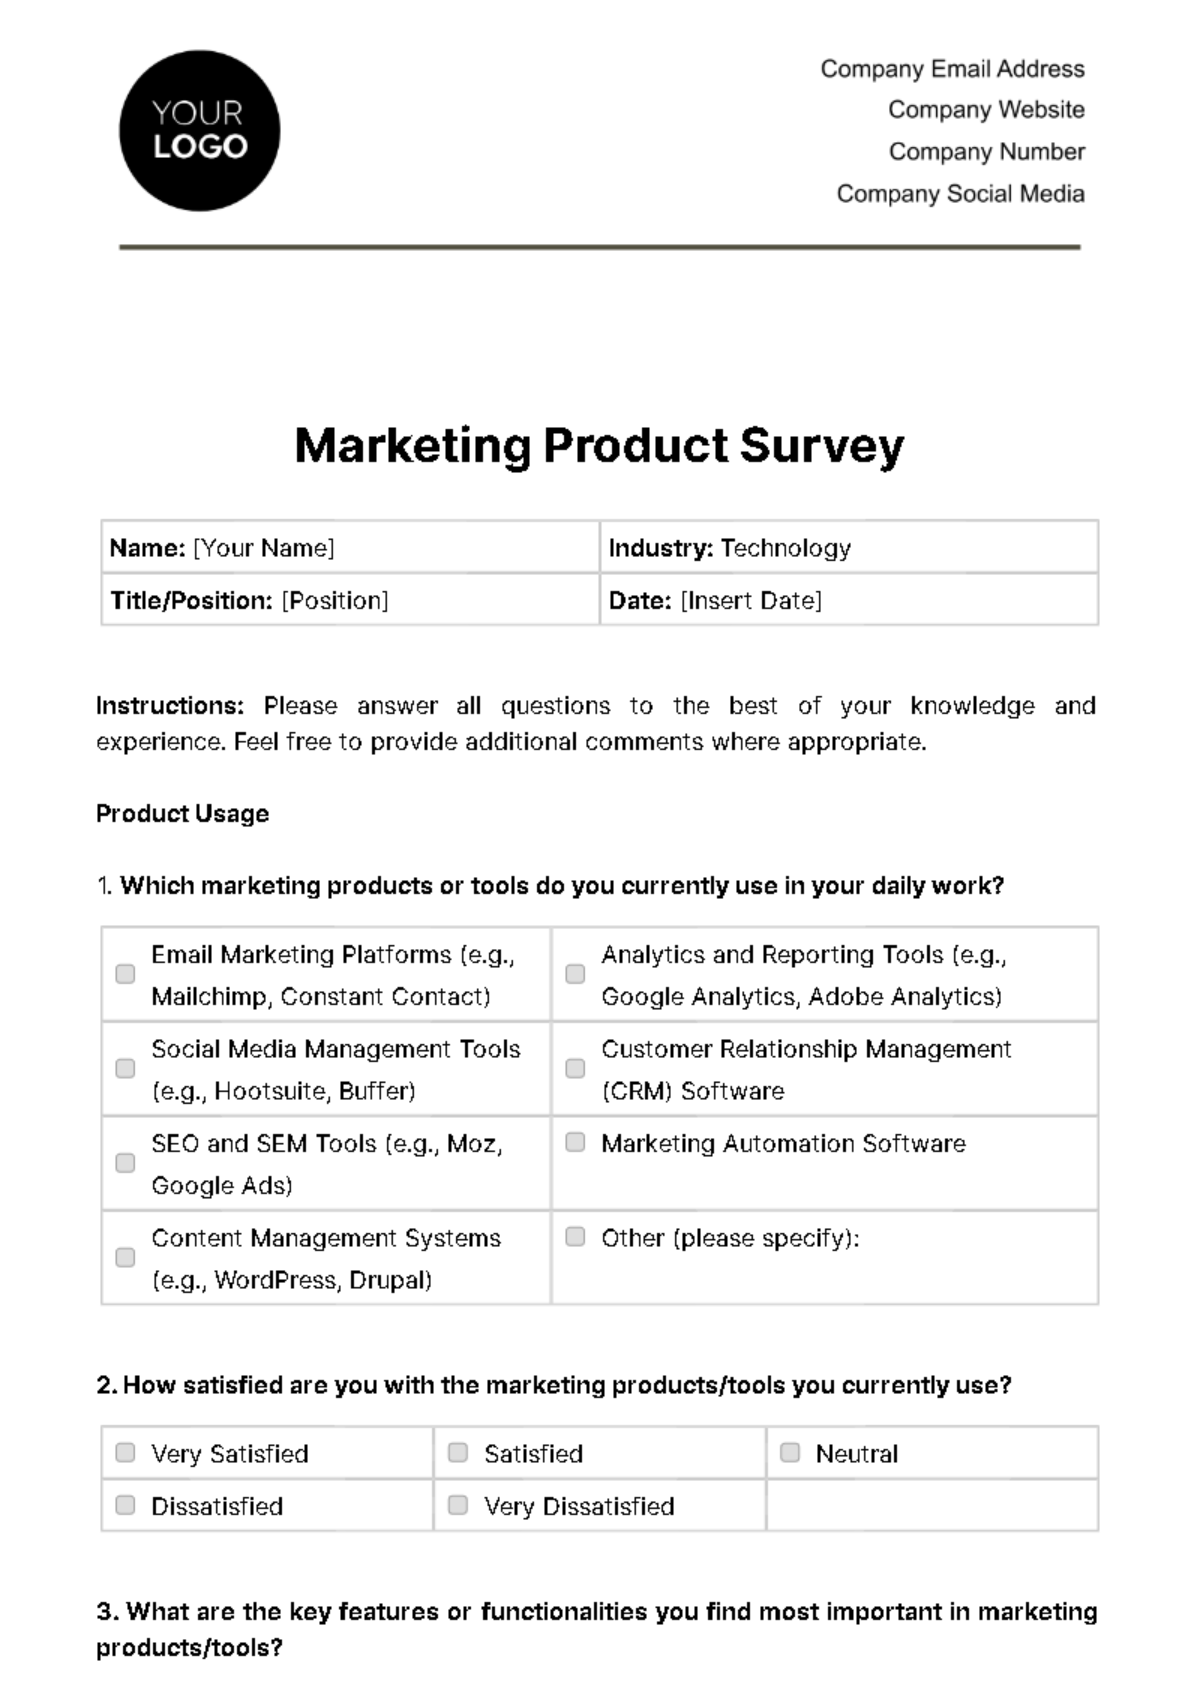 Marketing Product Survey Template